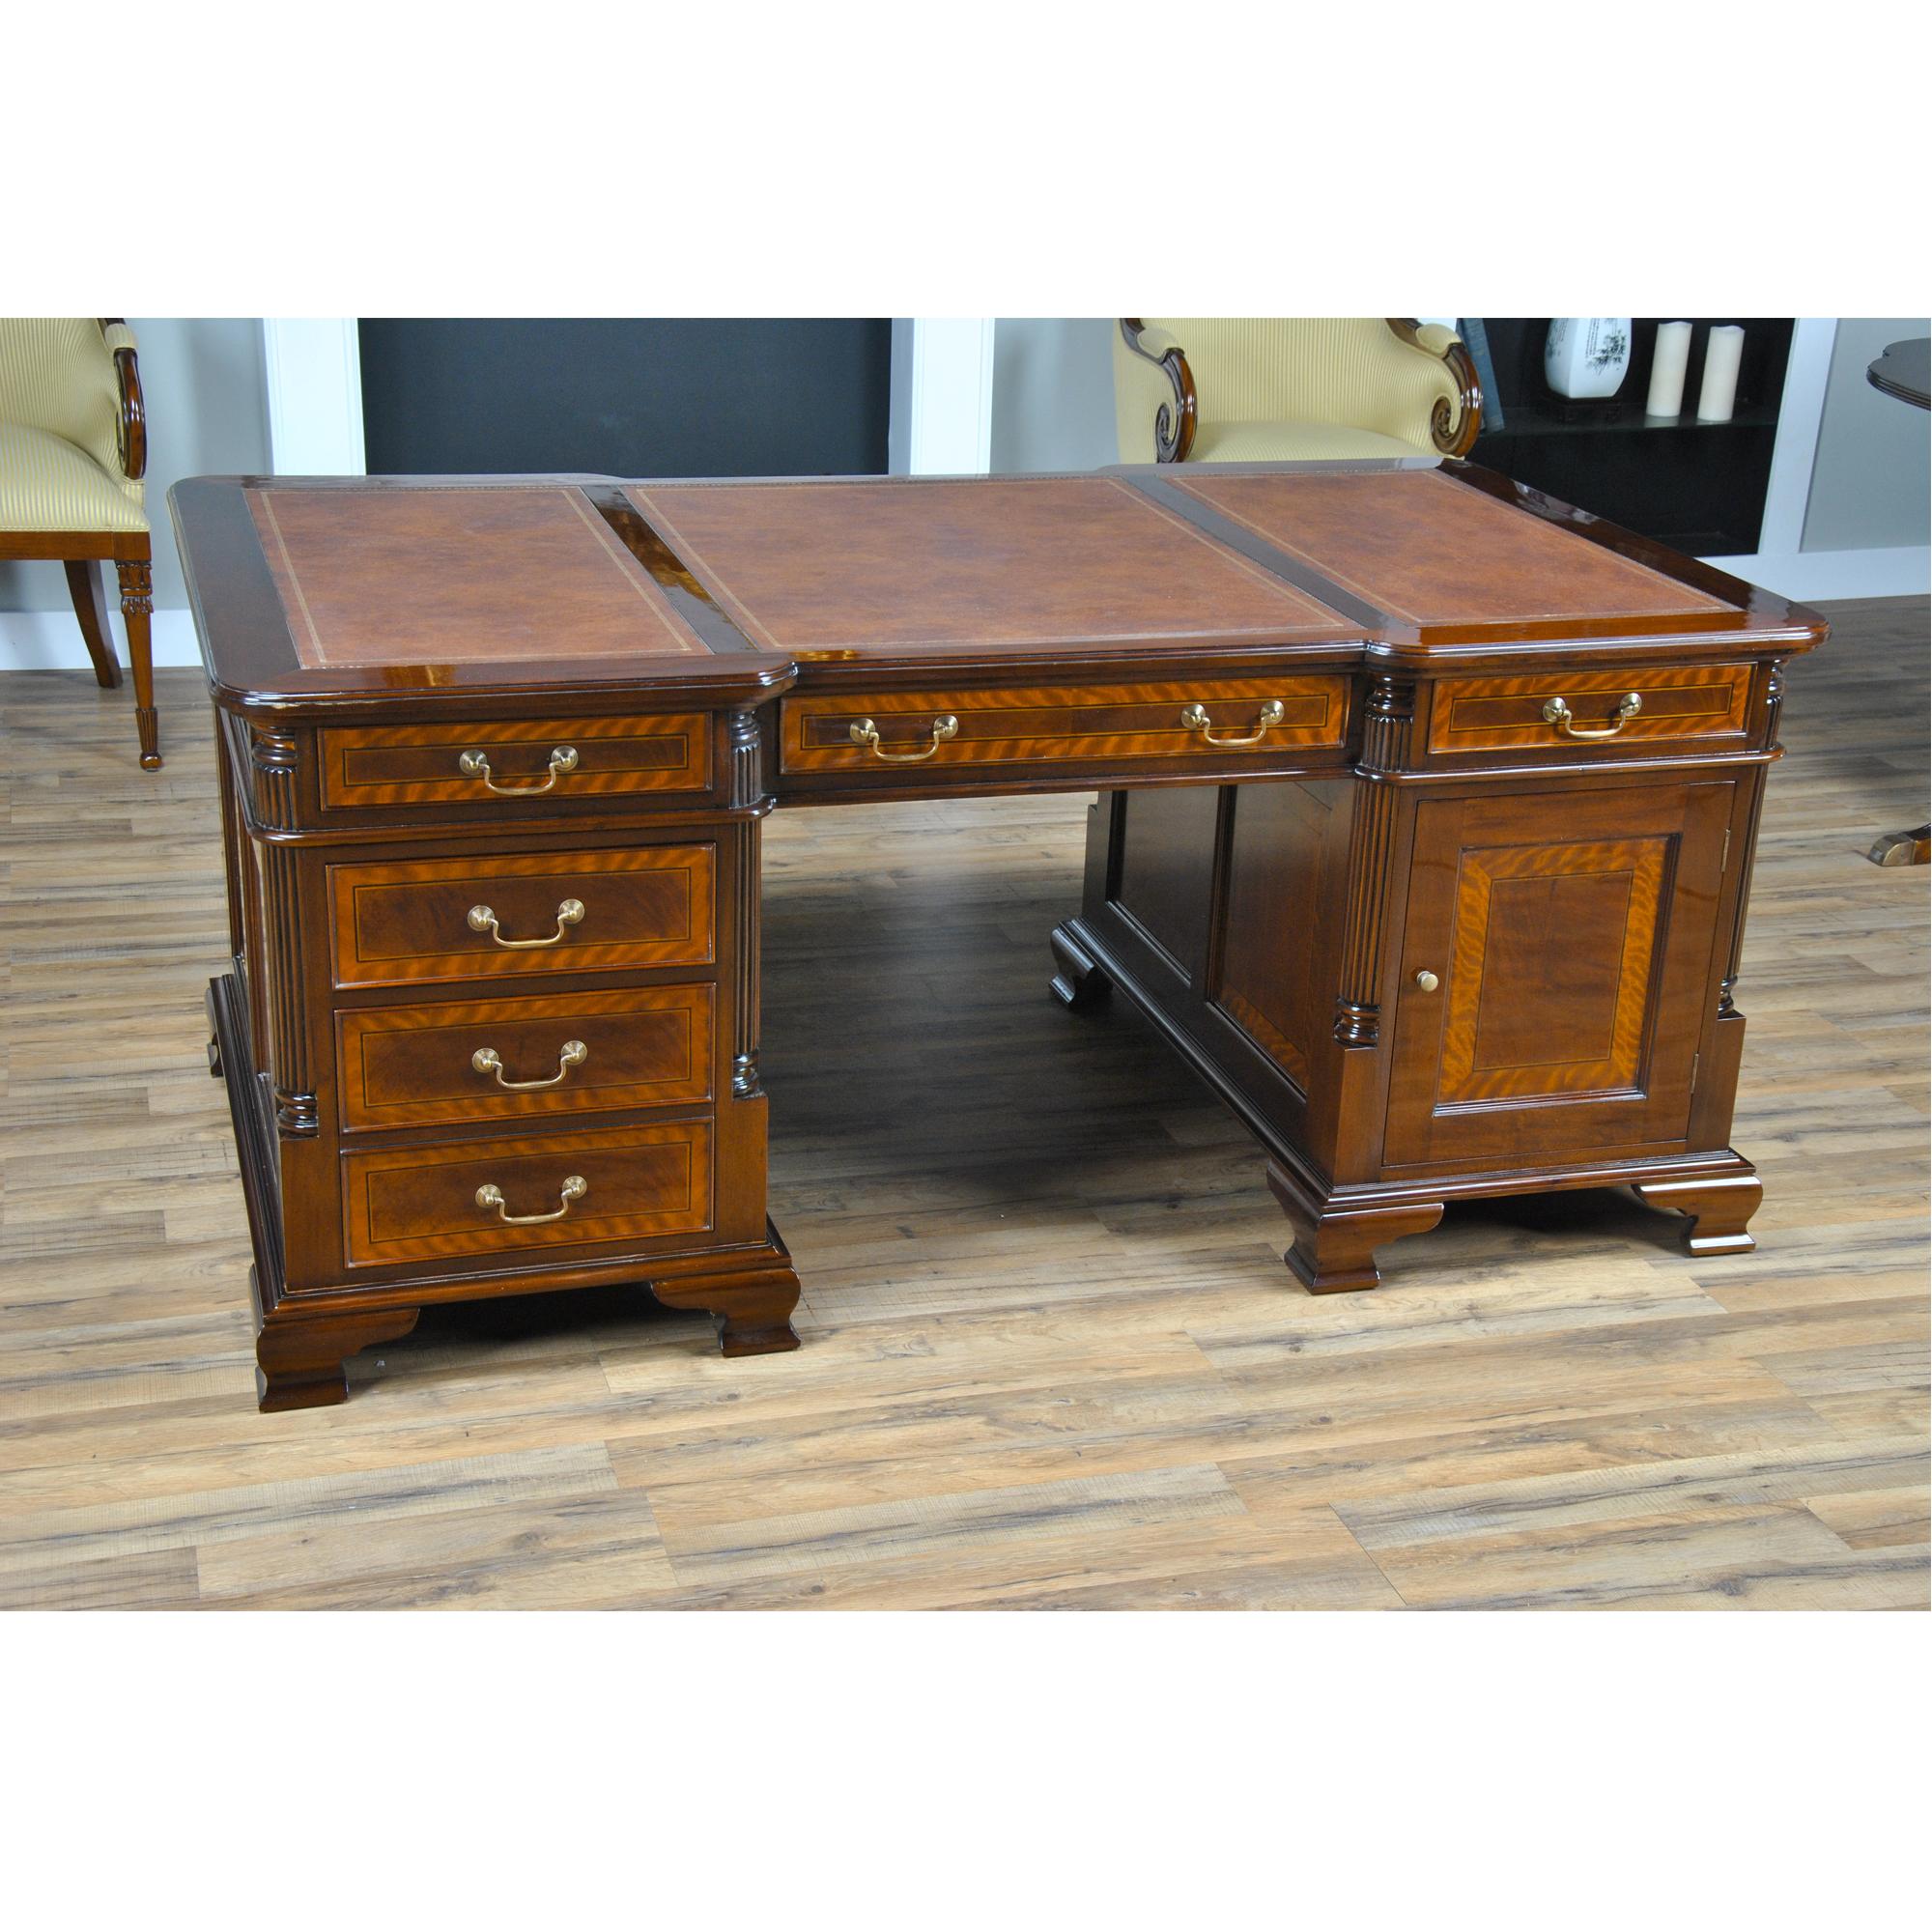 This beautiful Banded Mahogany Partners Desk is crafted as an antique reproduction. The figural mahogany in the drawer and door panels displays a rich color and a fine grain that are offset by the satinwood banding surrounding it. The three-paneled